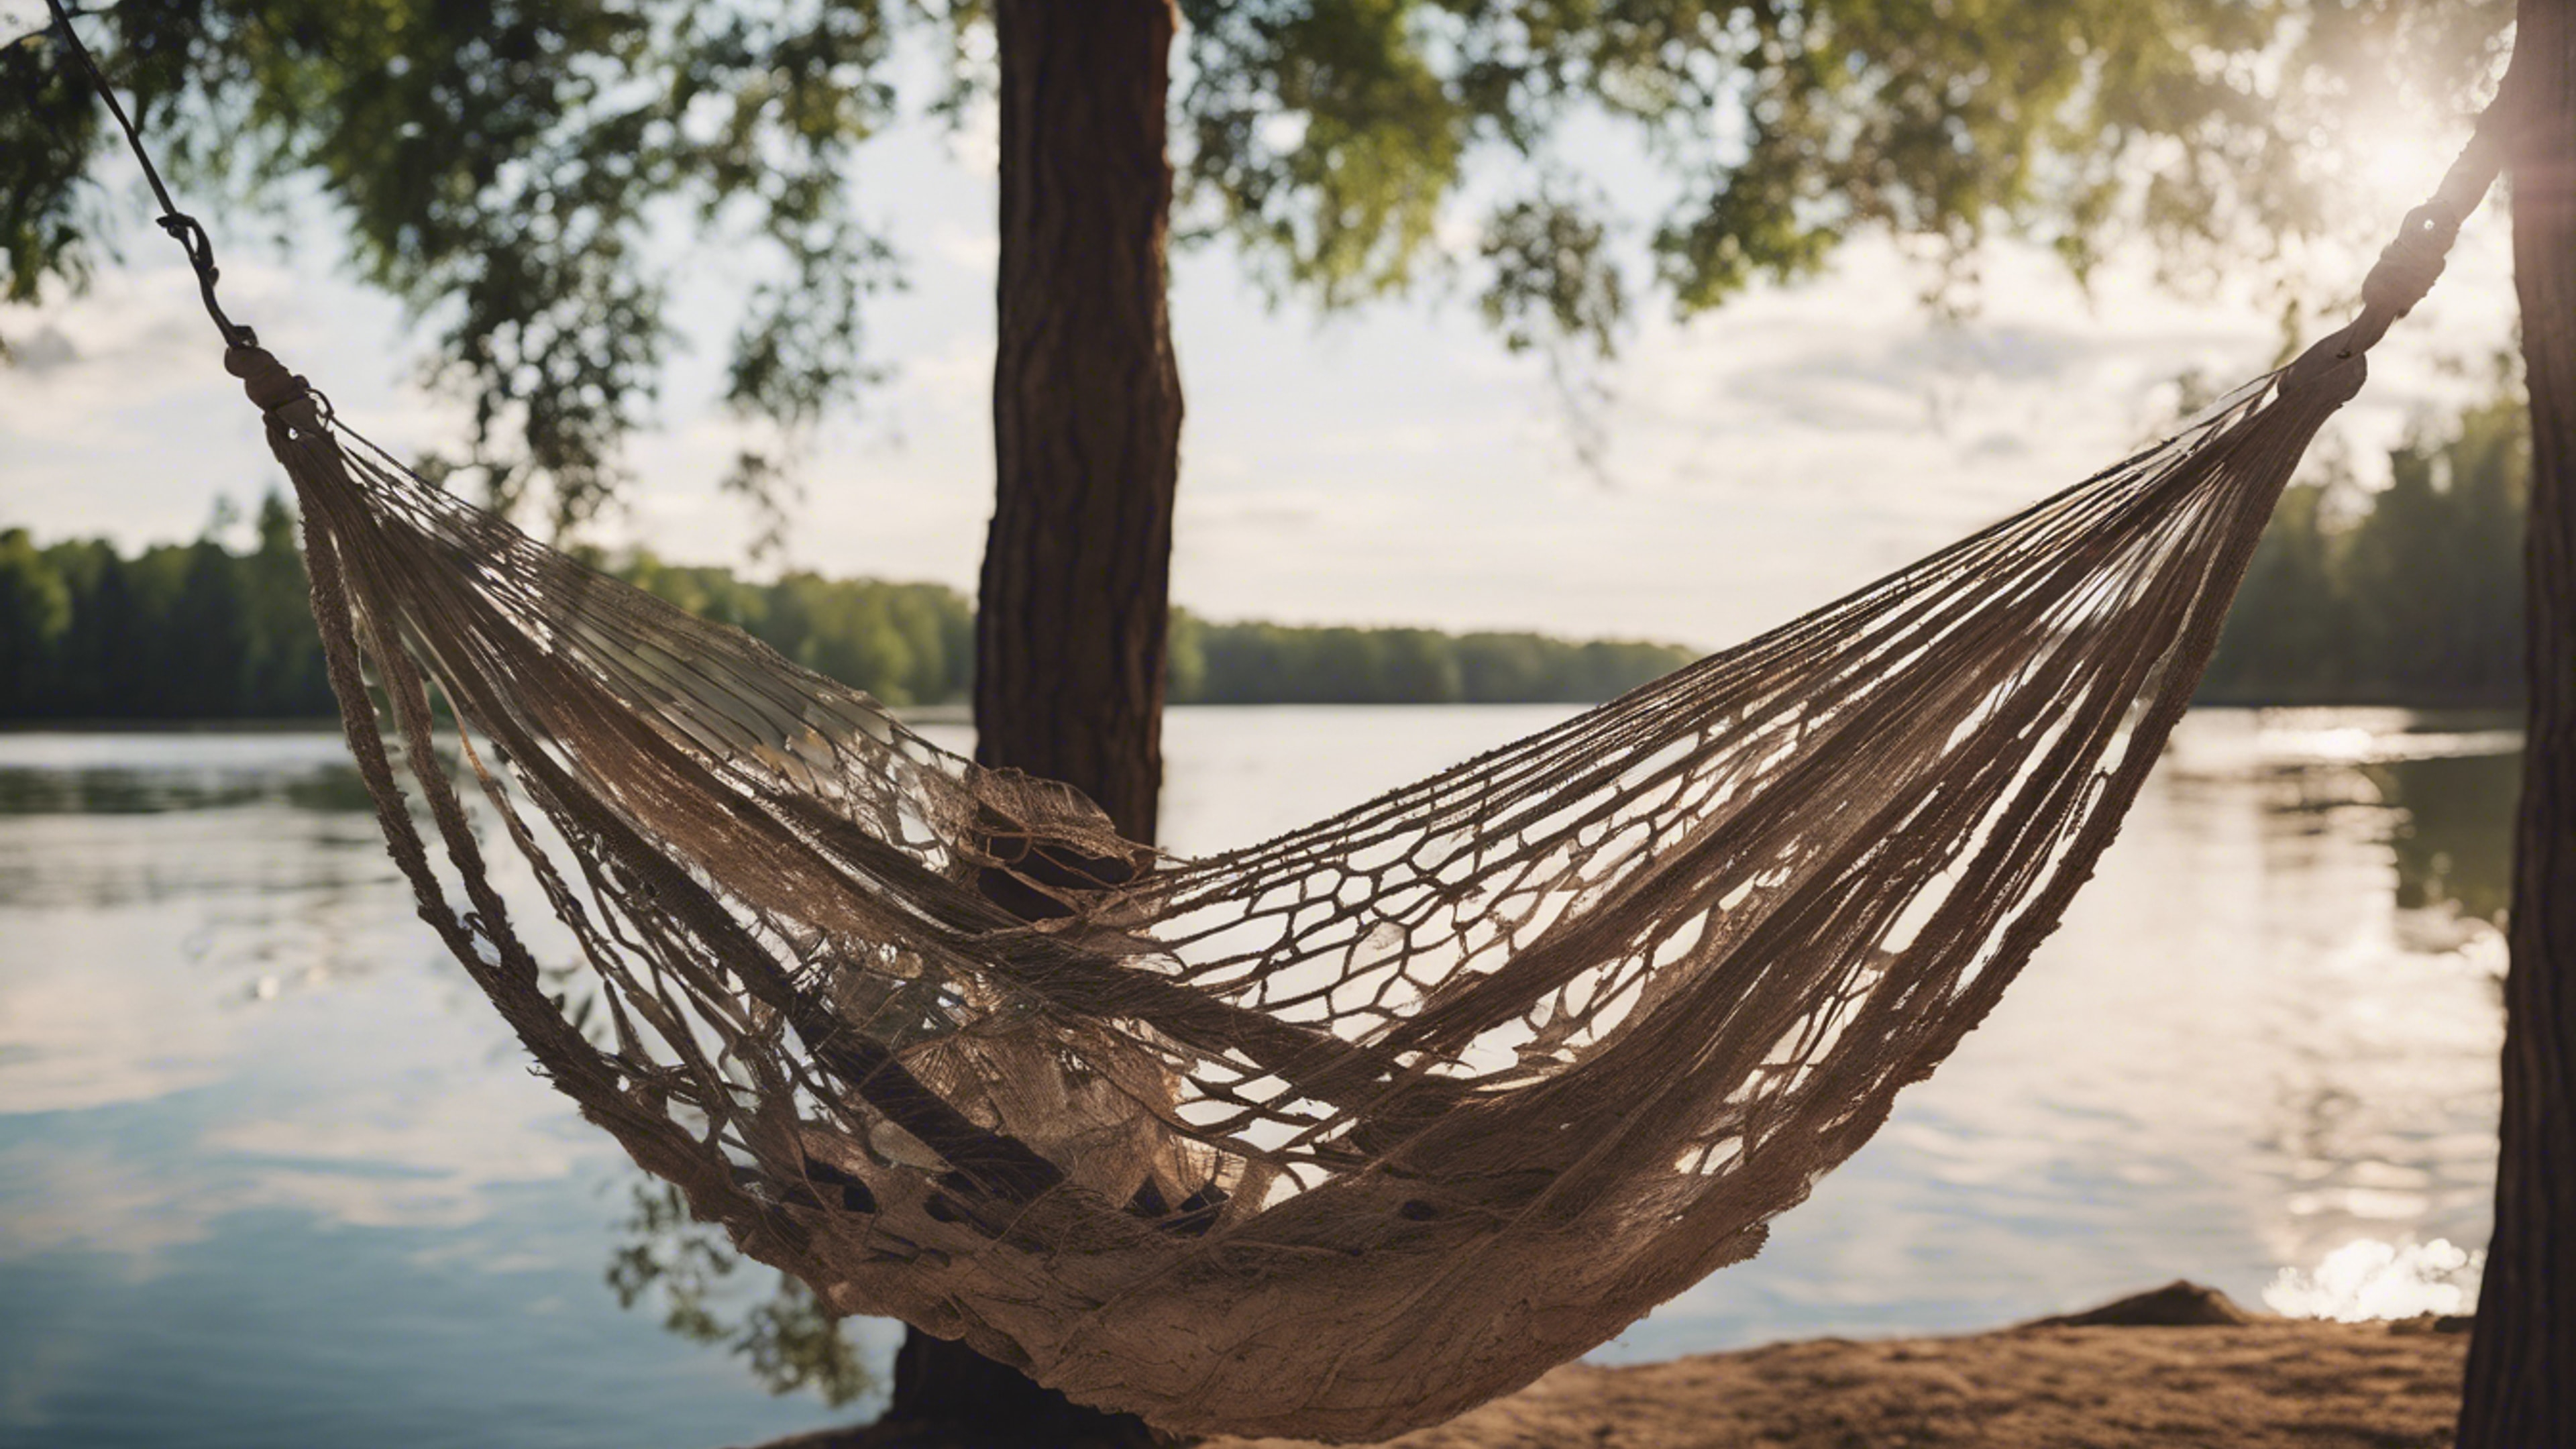 A rustic, serene summer lake view from a preppy-style hammock strung between two trees near the water’s edge. Wallpaper[f871c41635c947619a97]